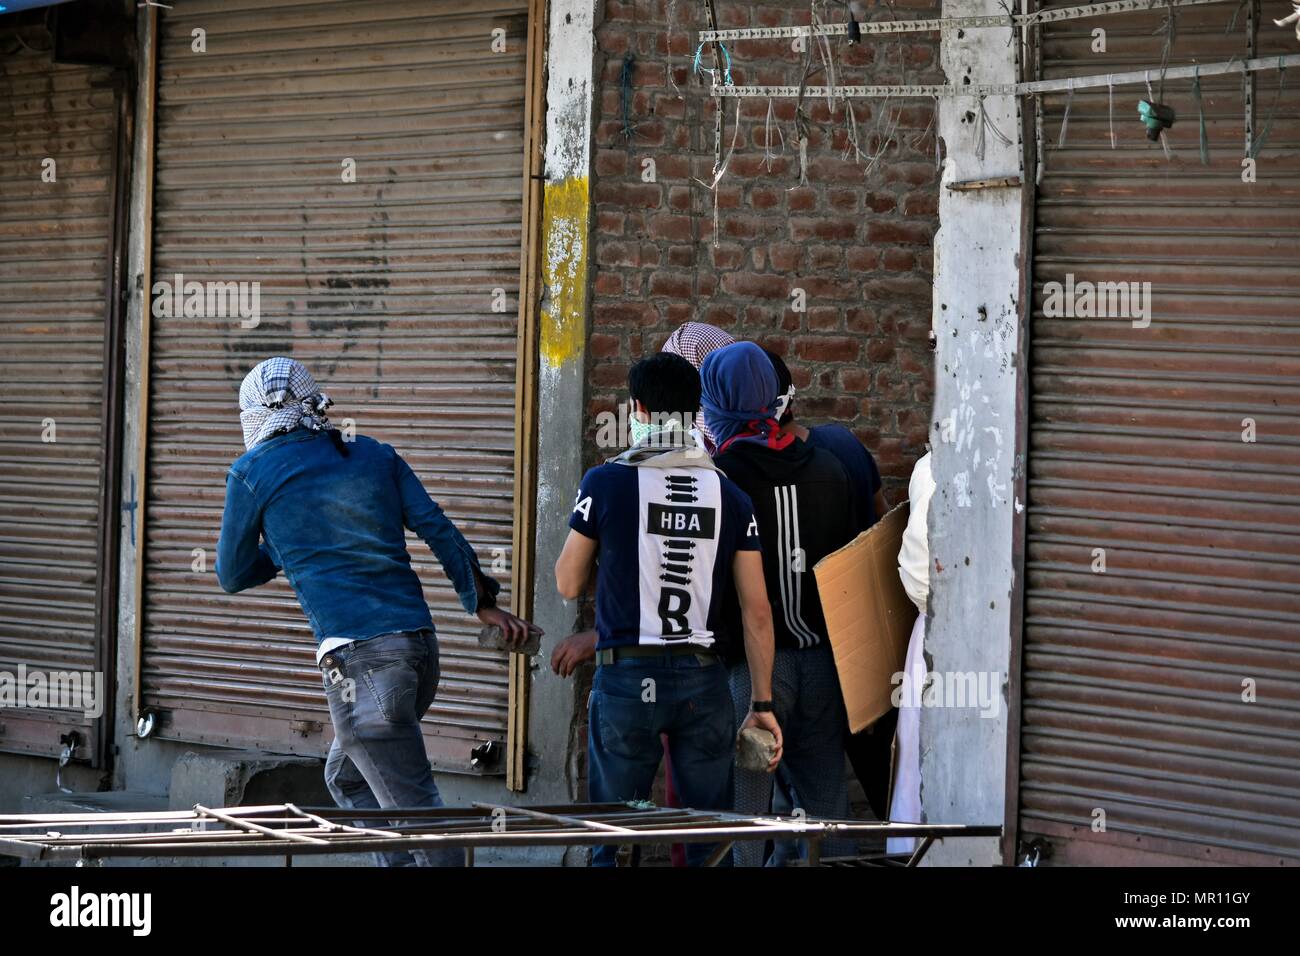 Kashmiri protesters prepare to throw stones at policemen during clashes in Srinagar, Indian administered Kashmir.  Fierce clashes broke out between government forces and Kashmiri protesters in Srinagar on Friday. Scores of people were injured after government forces fired shotgun pellets and smoke shells on Kashmiri protesters who gathered after the mandatory Friday congregational prayers. Credit: SOPA Images Limited/Alamy Live News Stock Photo